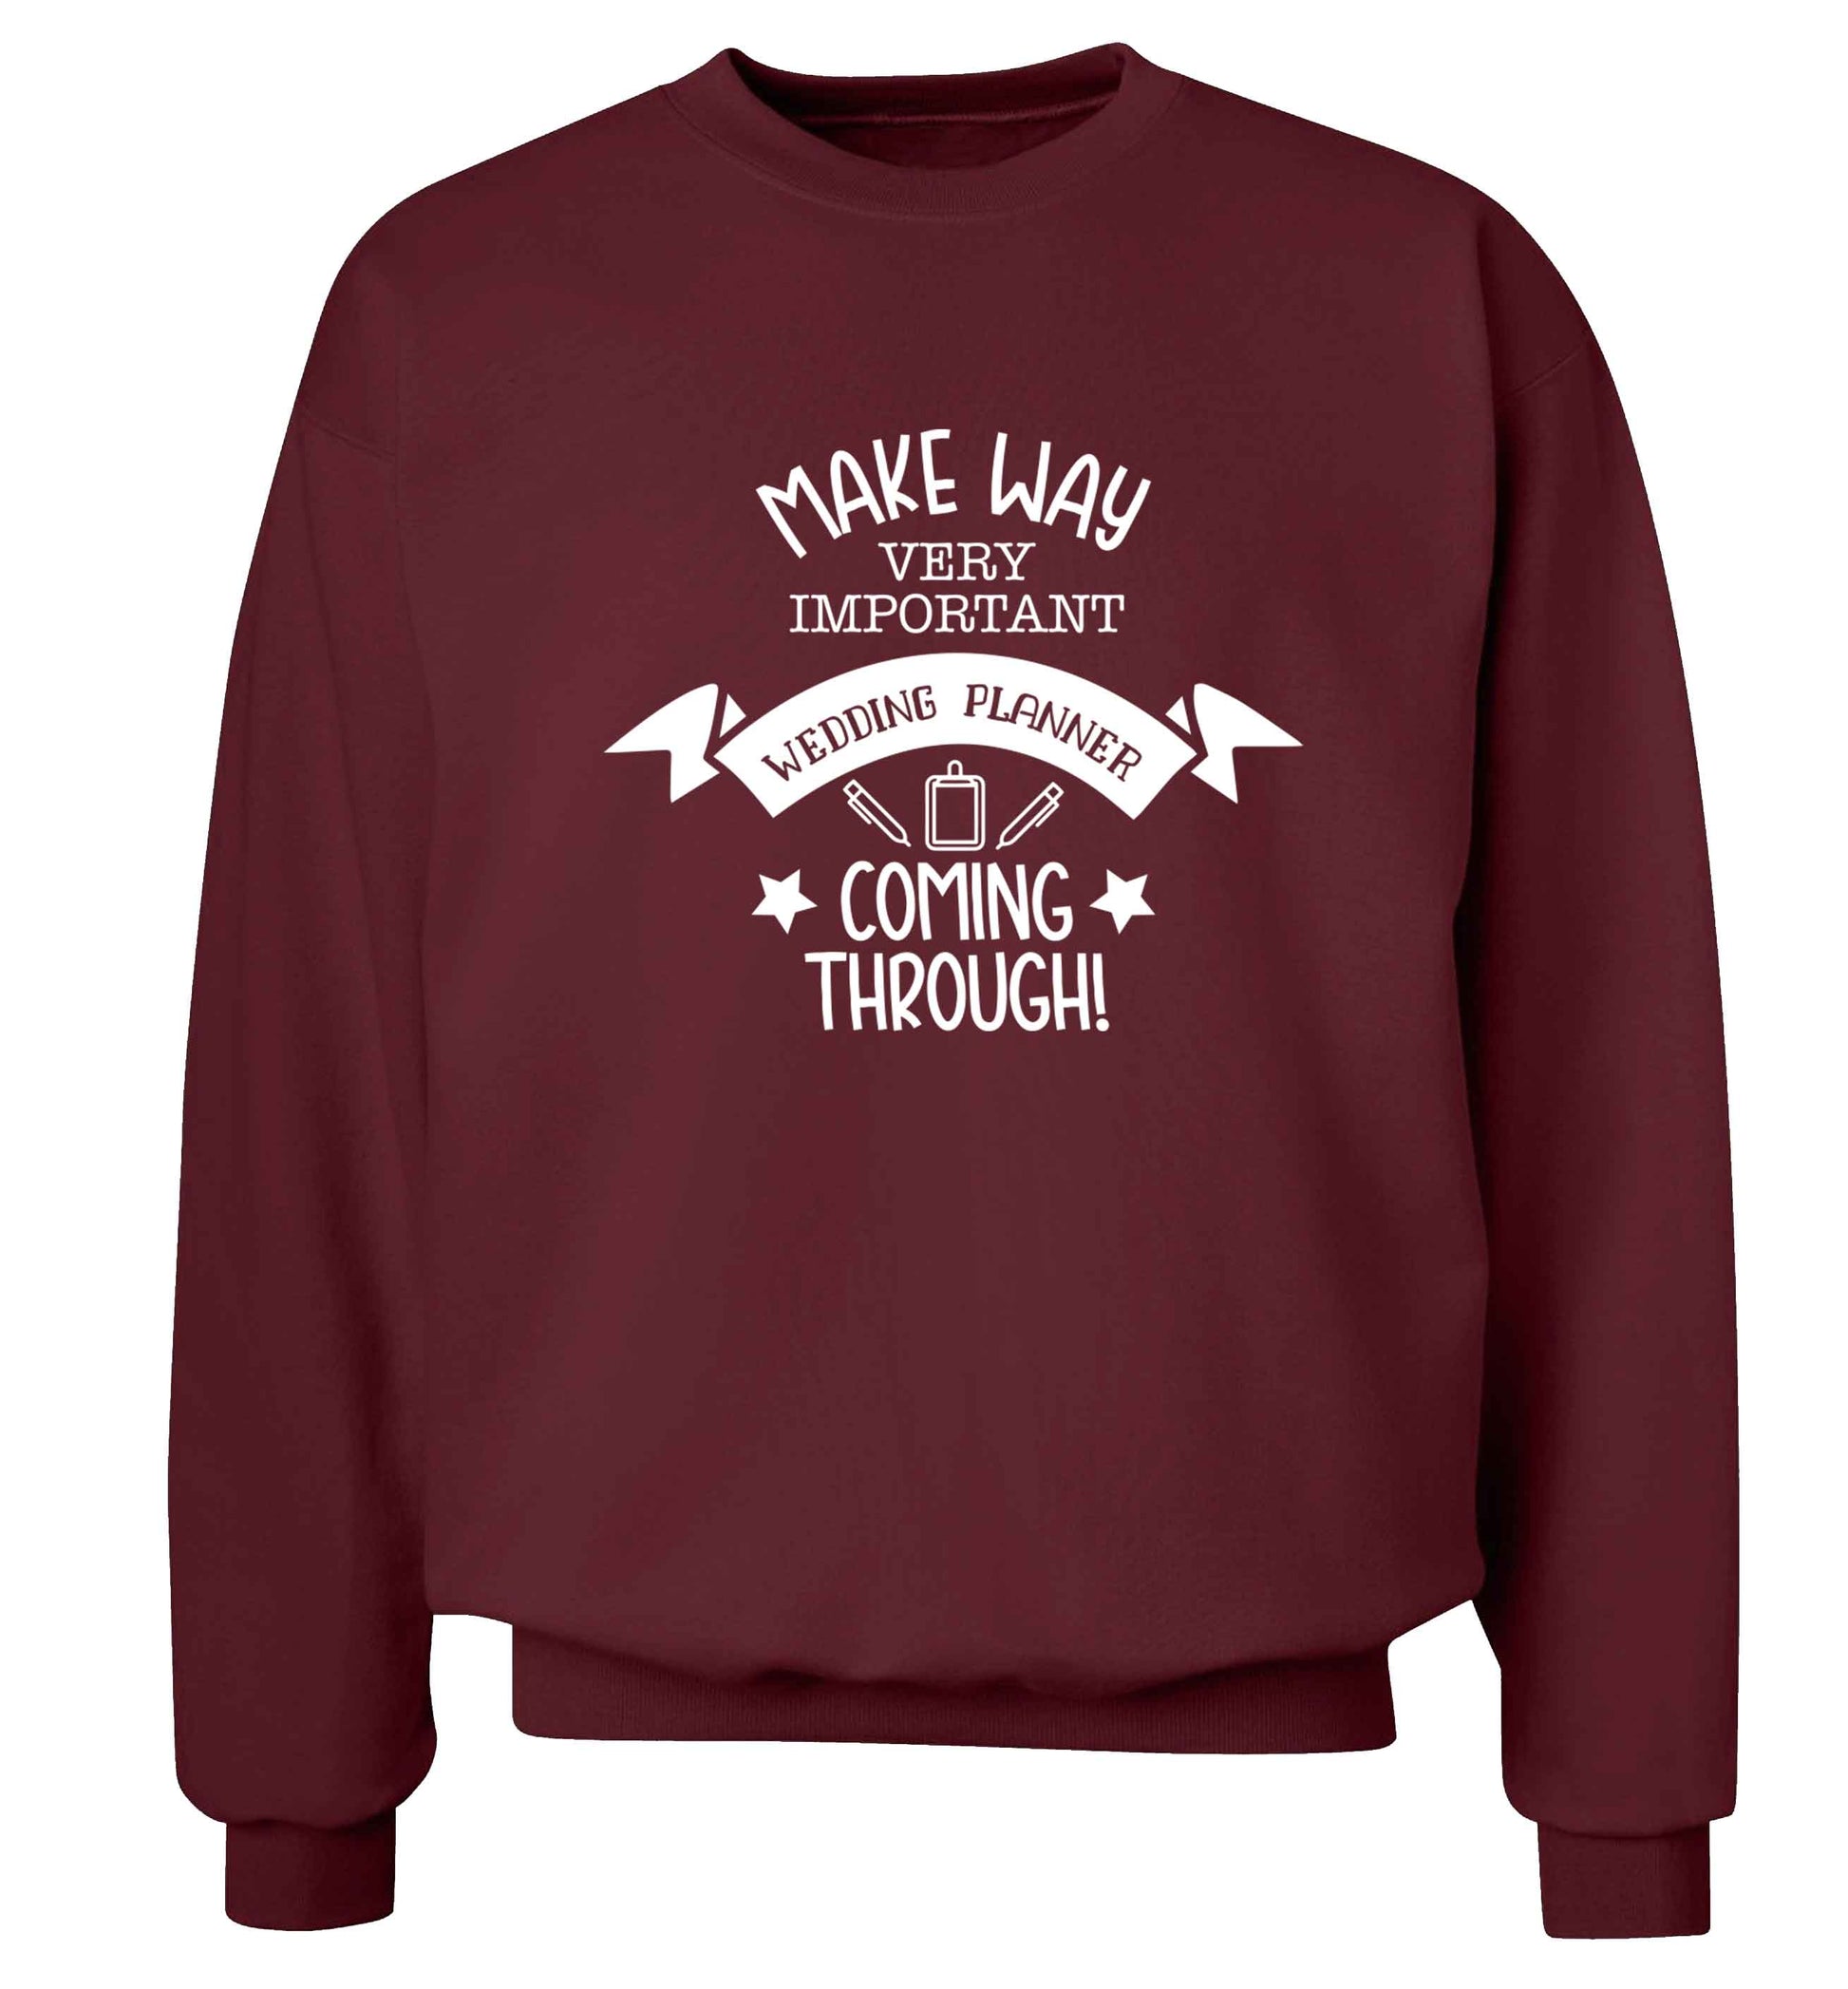 Make way very important wedding planner coming through Adult's unisex maroon Sweater 2XL